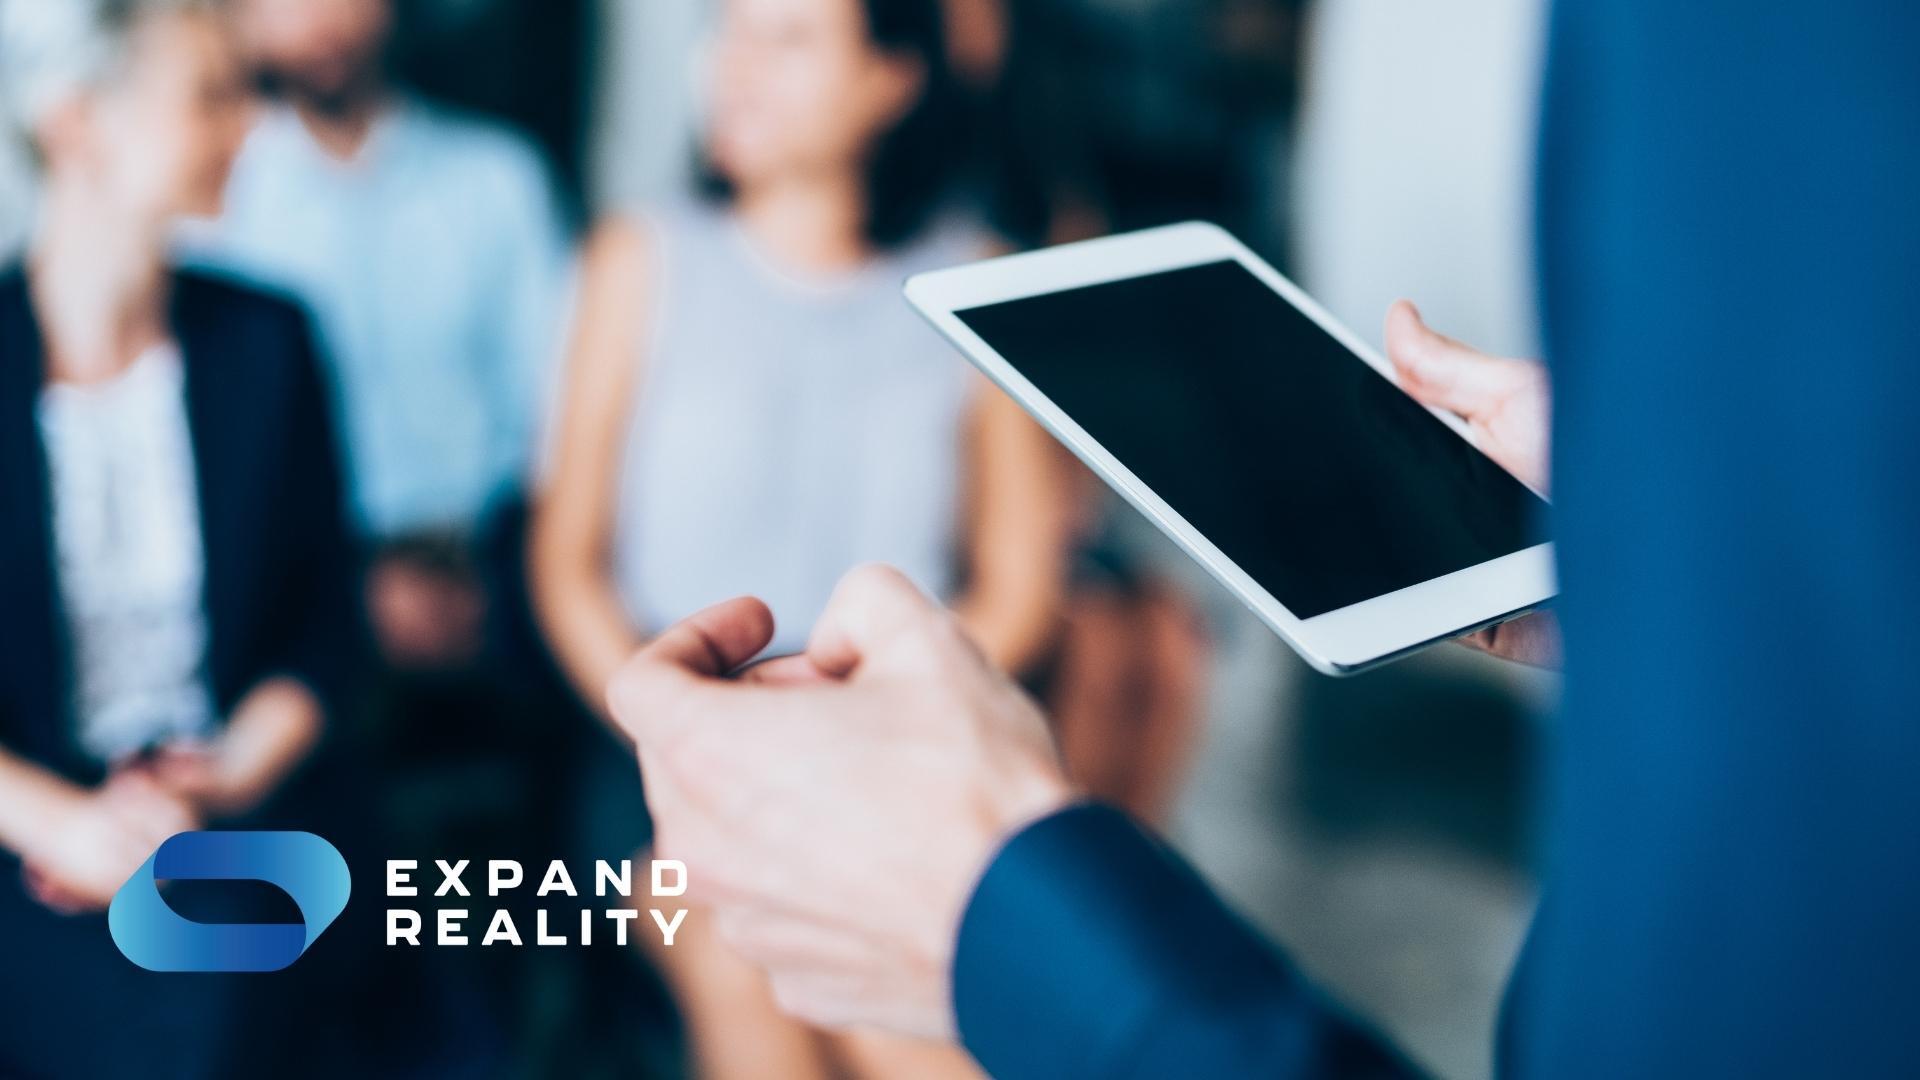 Learn how your business can use XR technology to train workers more quickly and effectively. (PLUS: just what does XR have to do with toothpaste?)